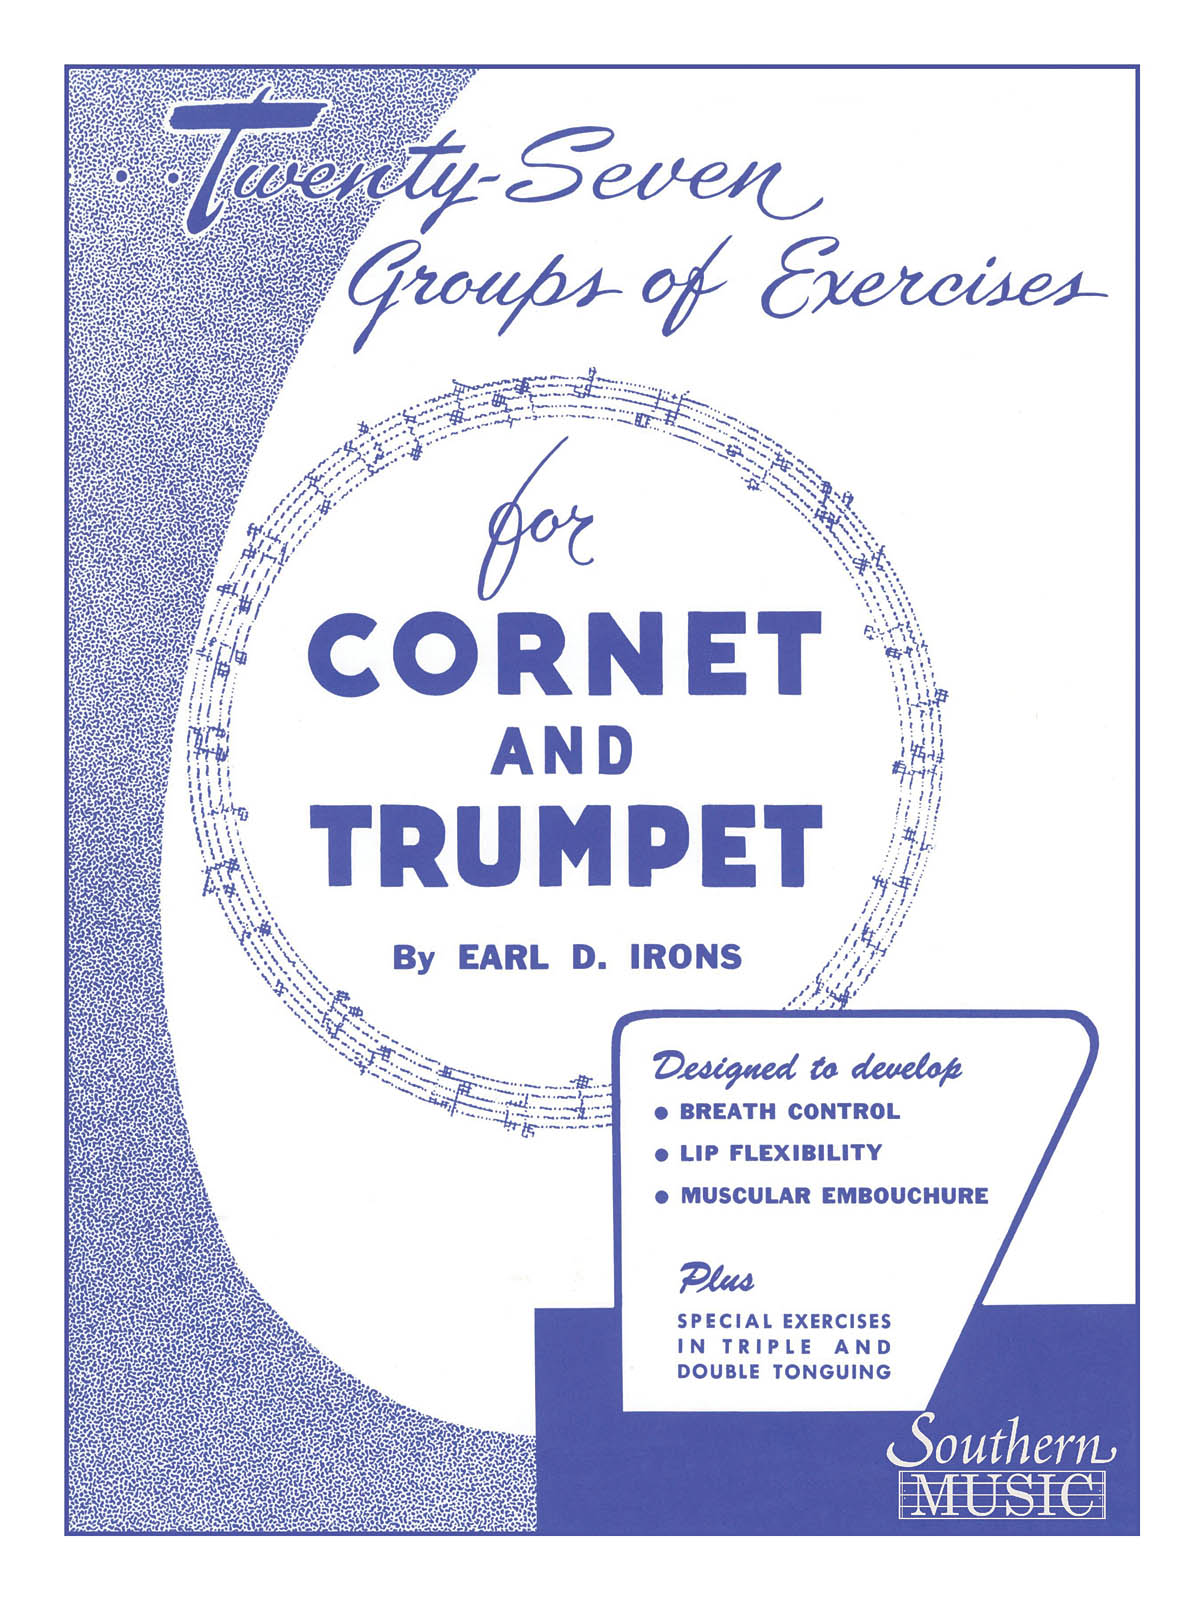 Earl Irons: 27 Groups of Exercises For Cornet and Trumpet